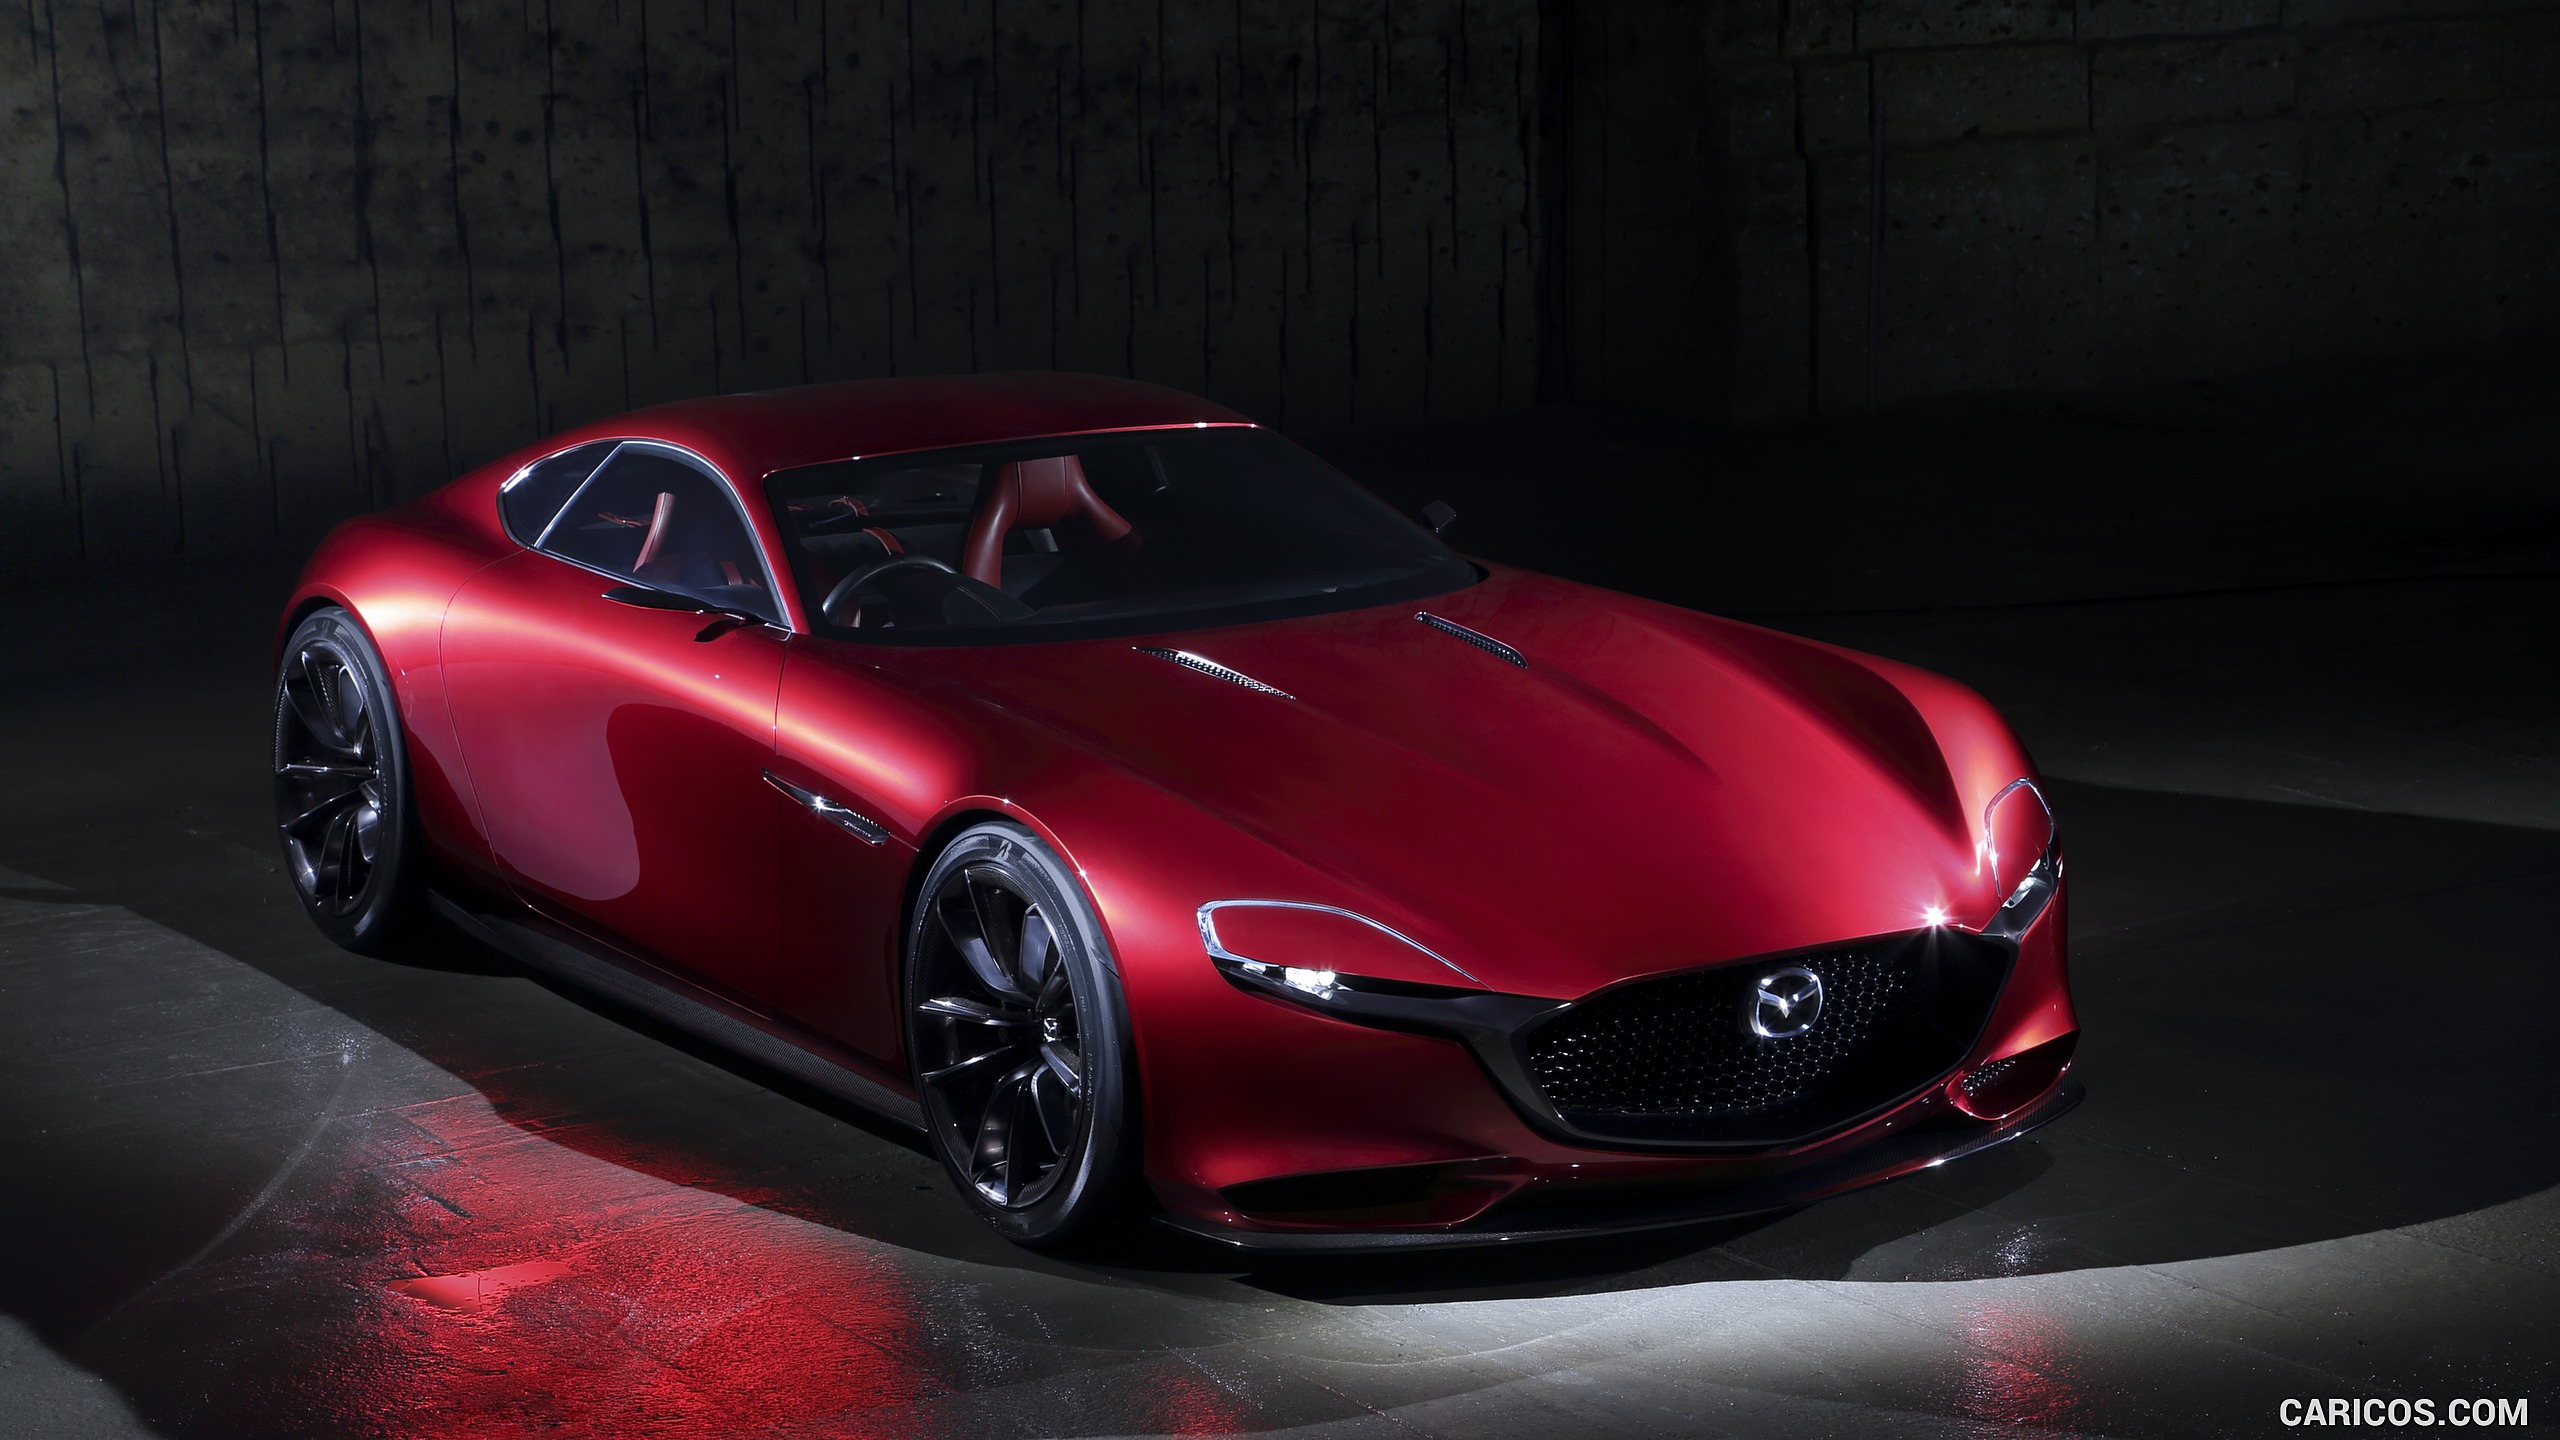 2015 Mazda RX-VISION Concept - Front, #1 of 16